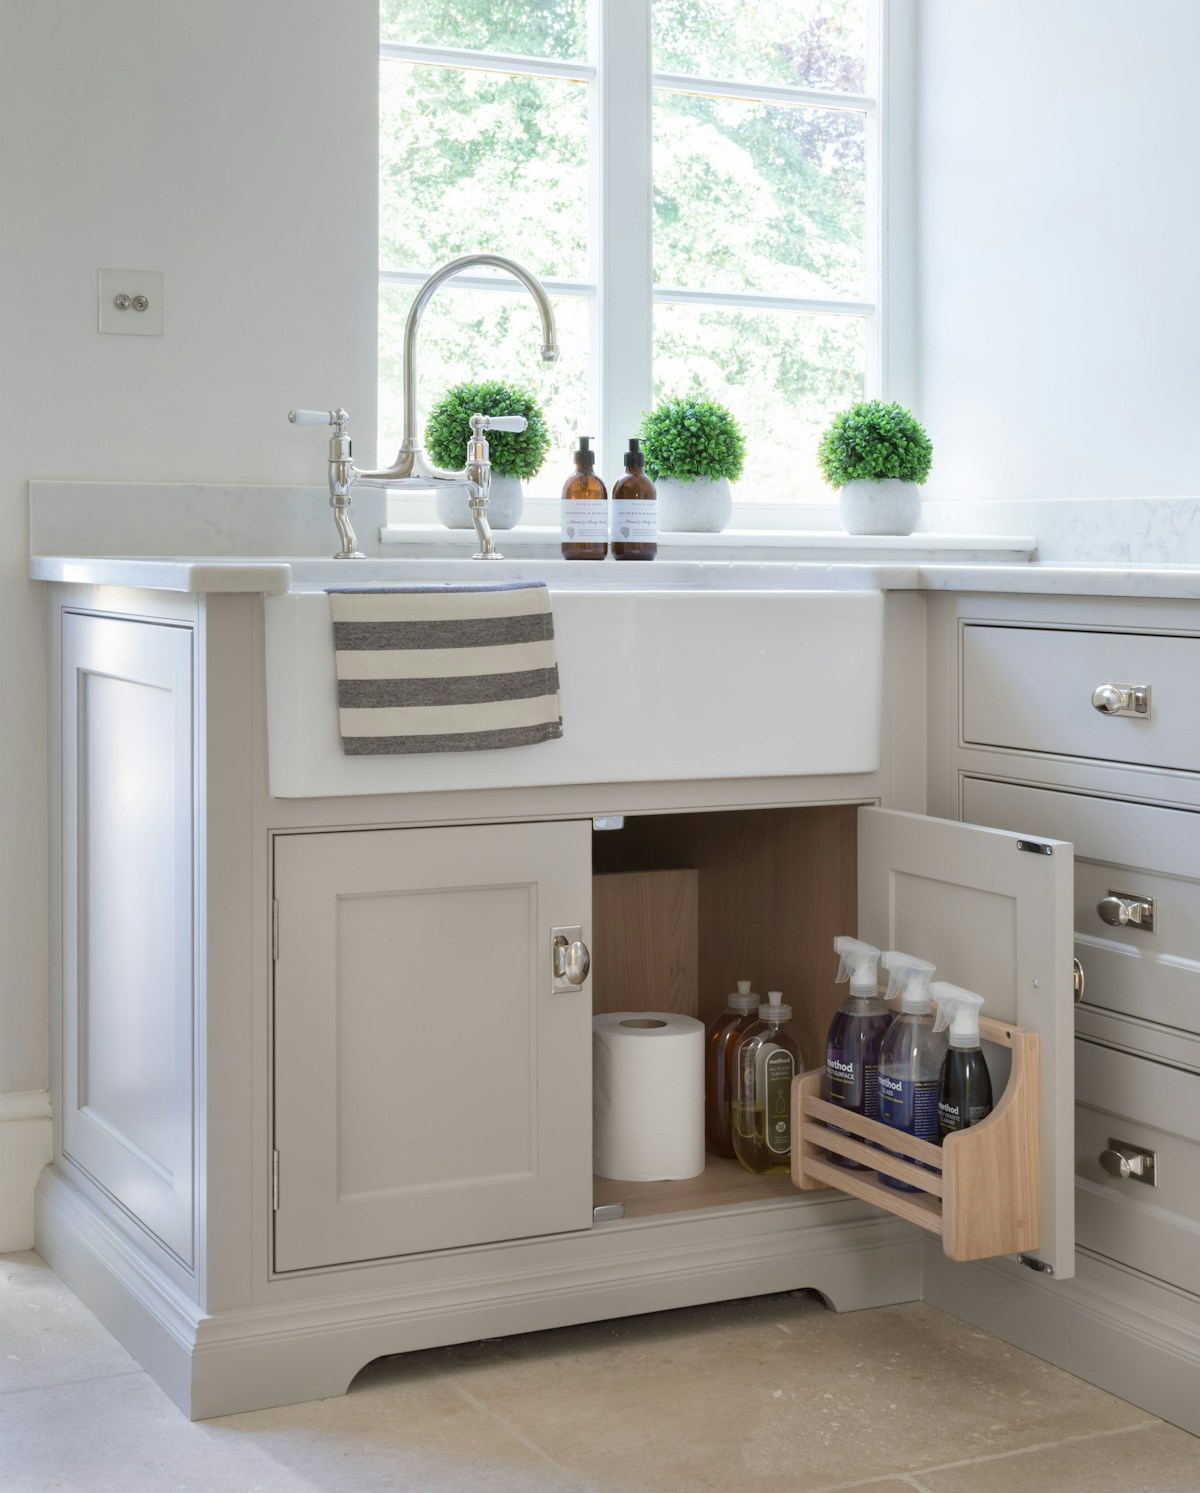 Utility Rooms vs Laundry Rooms: What is the difference? A Detailed Comparison - LuxDeco.com